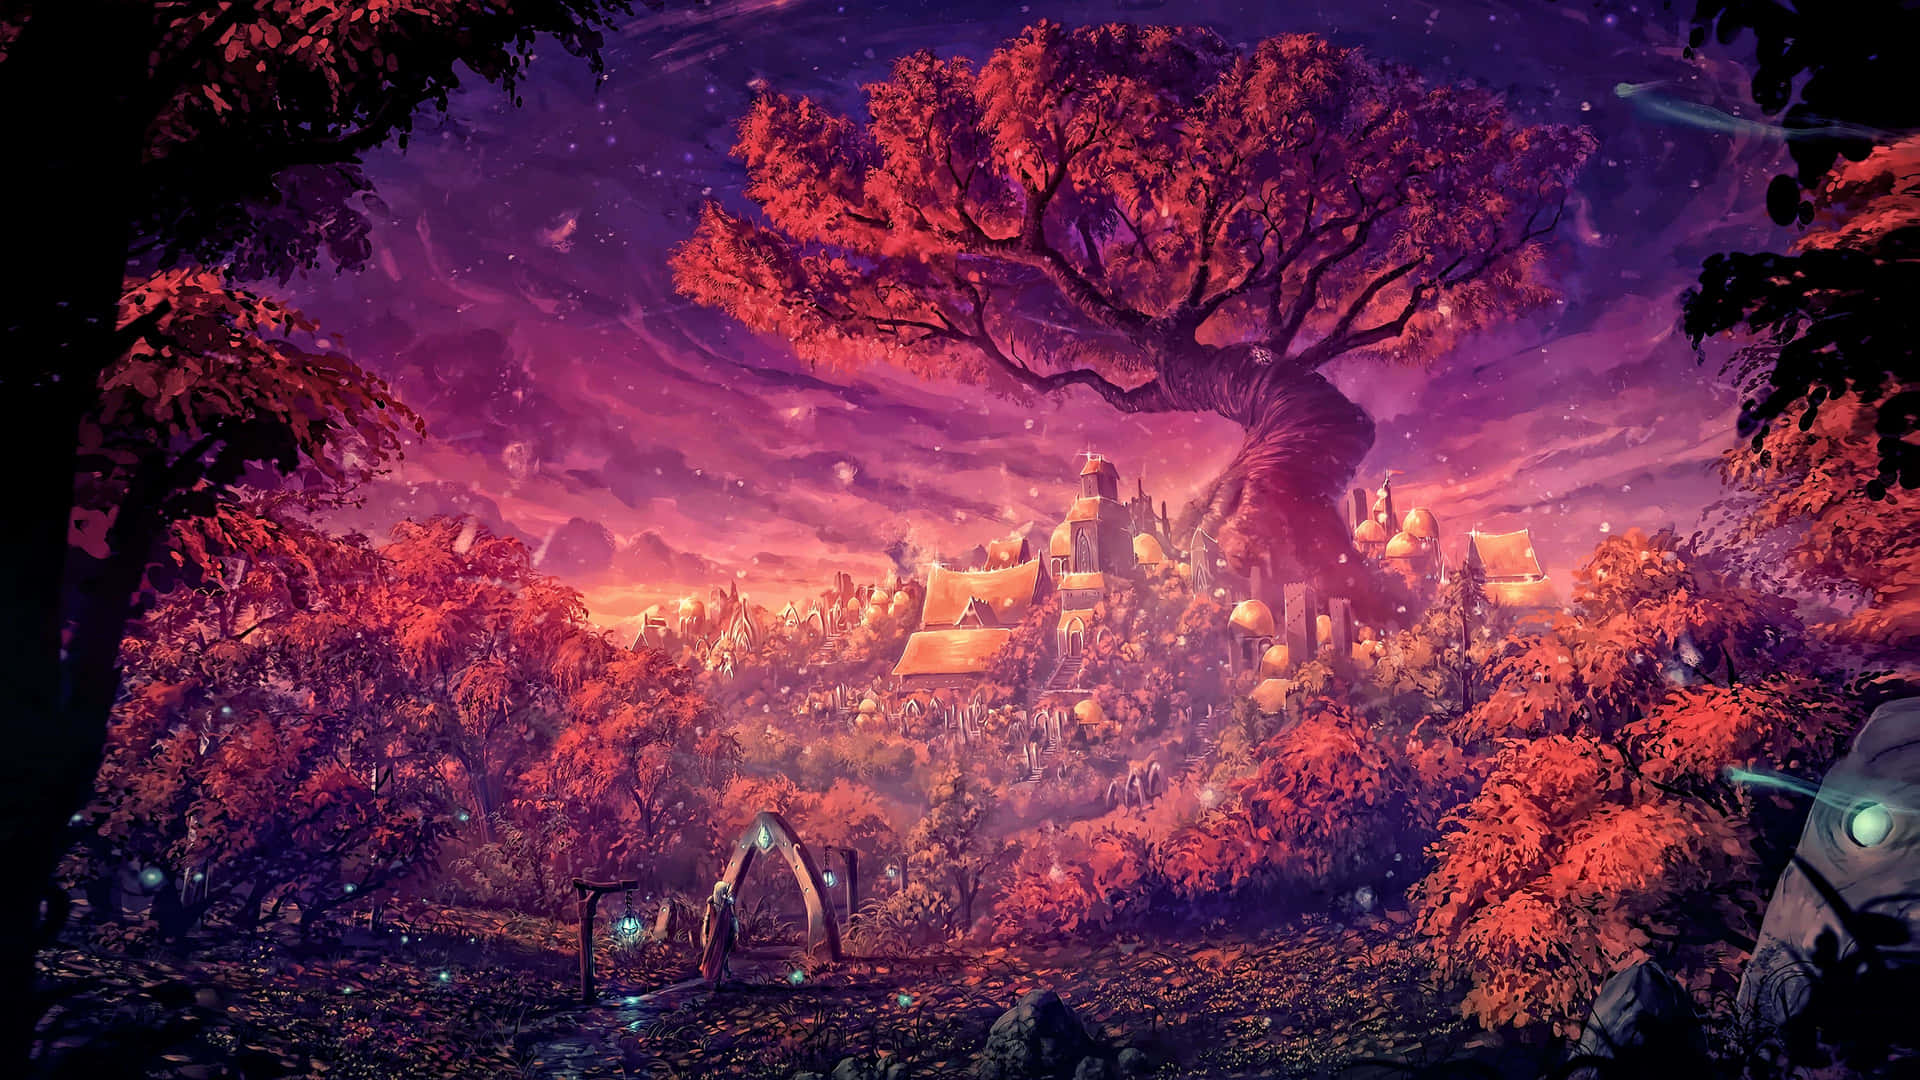 Tree Of Life In Fantasy Forest Wallpaper